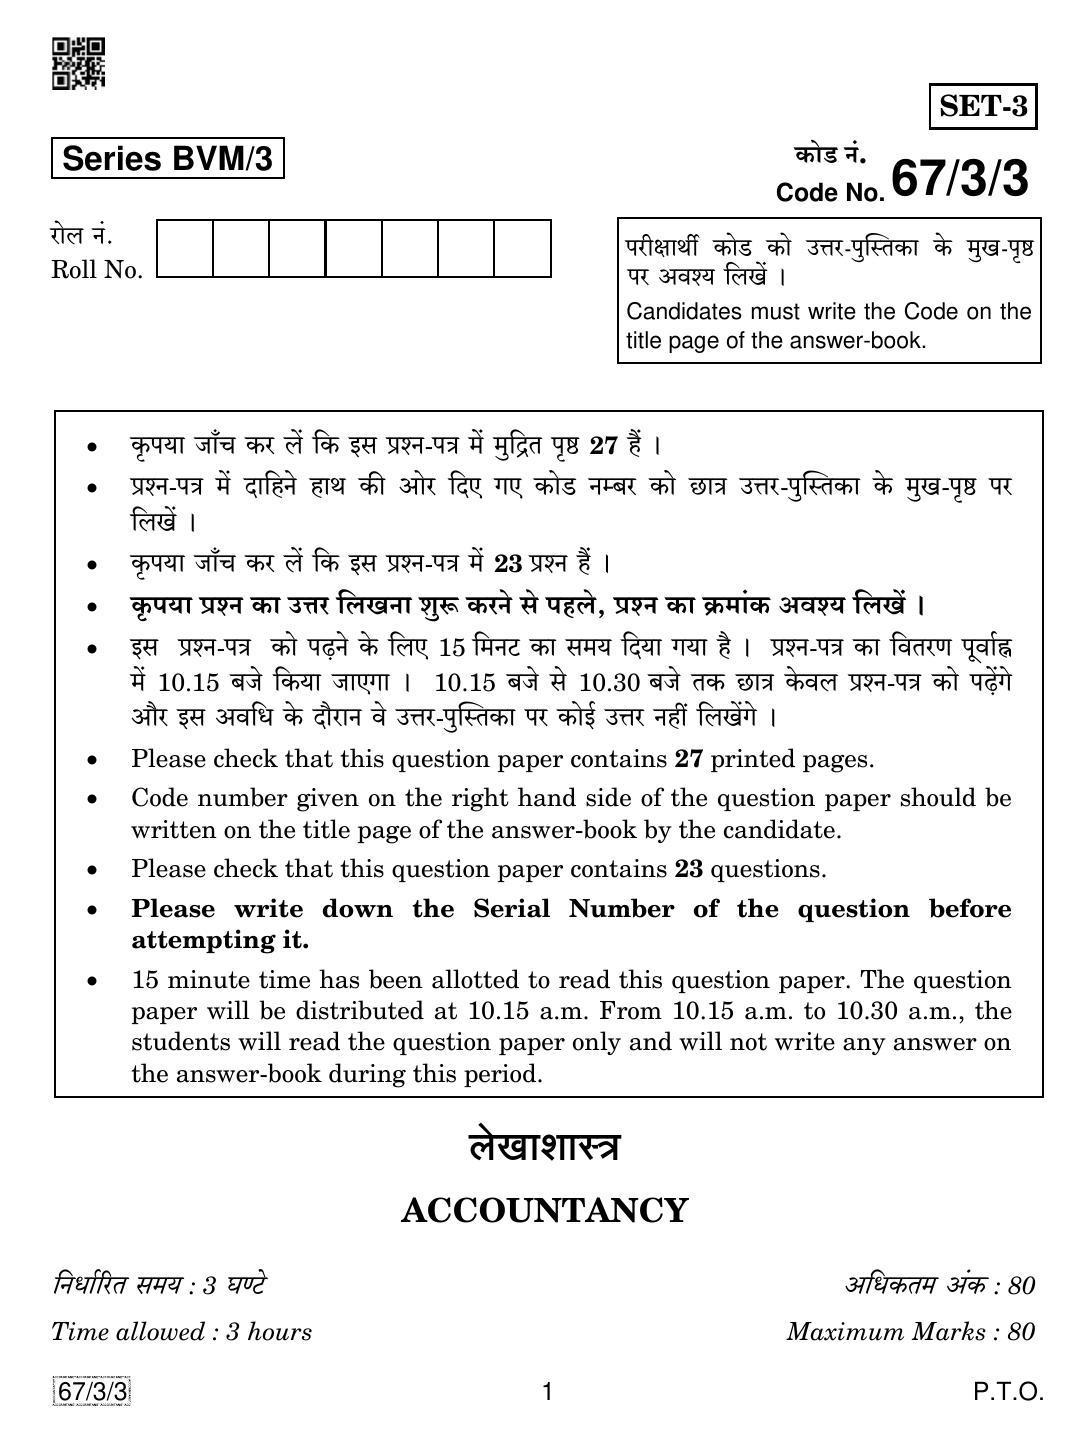 CBSE Class 12 67-3-3 Accountancy 2019 Question Paper - Page 1